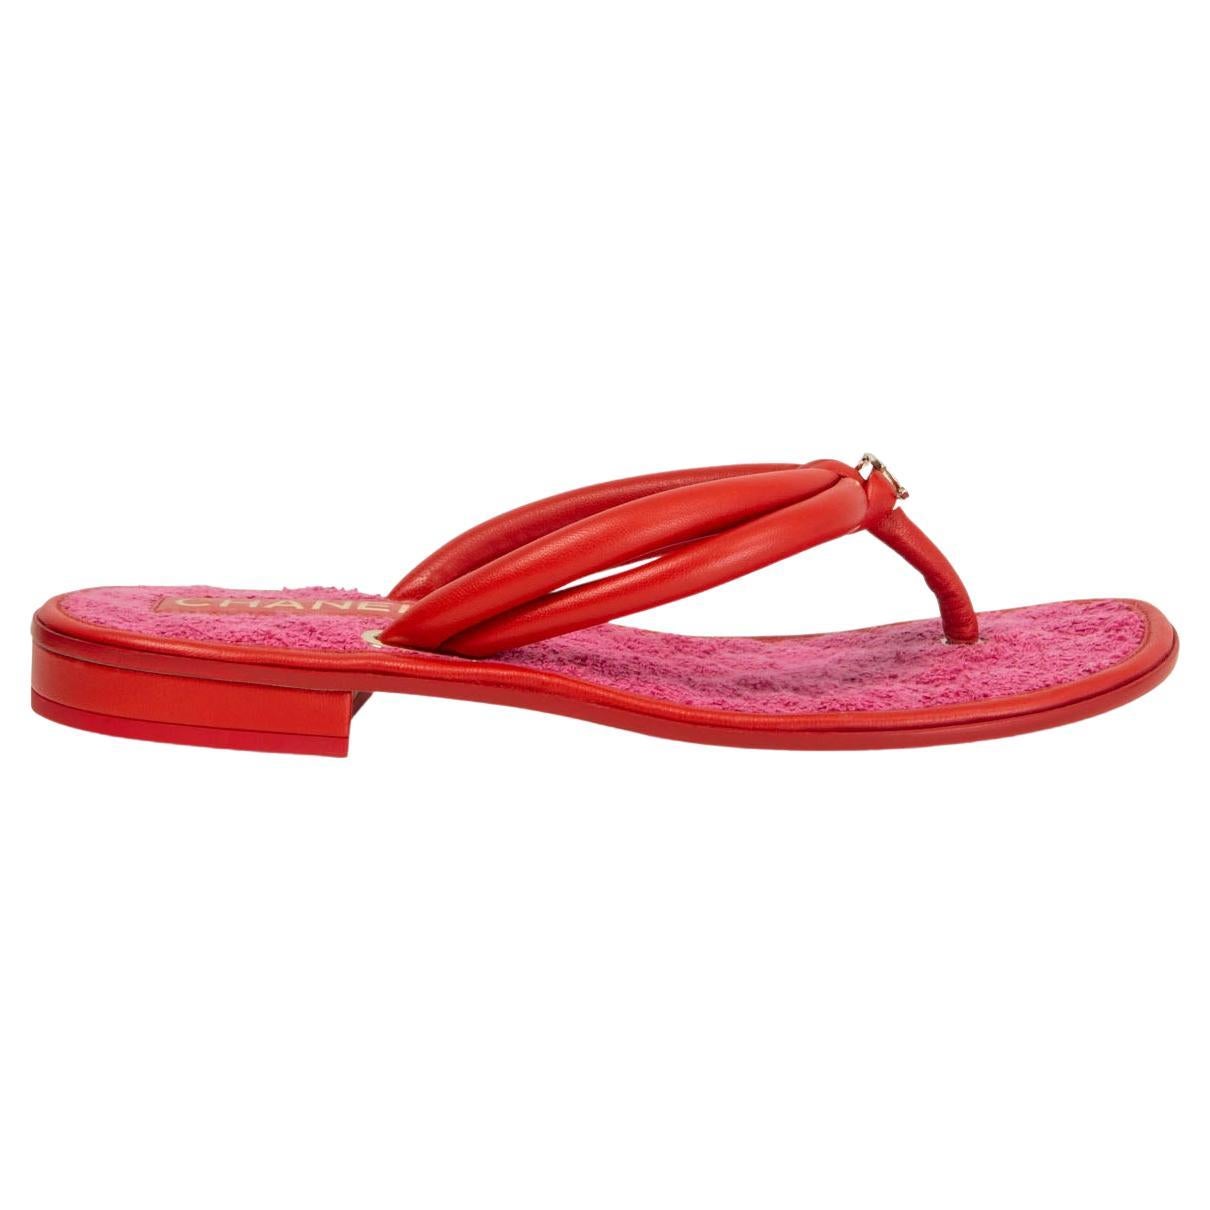 CHANEL red leather & pink terry cloth FLAT THONG Sandals Shoes 38.5